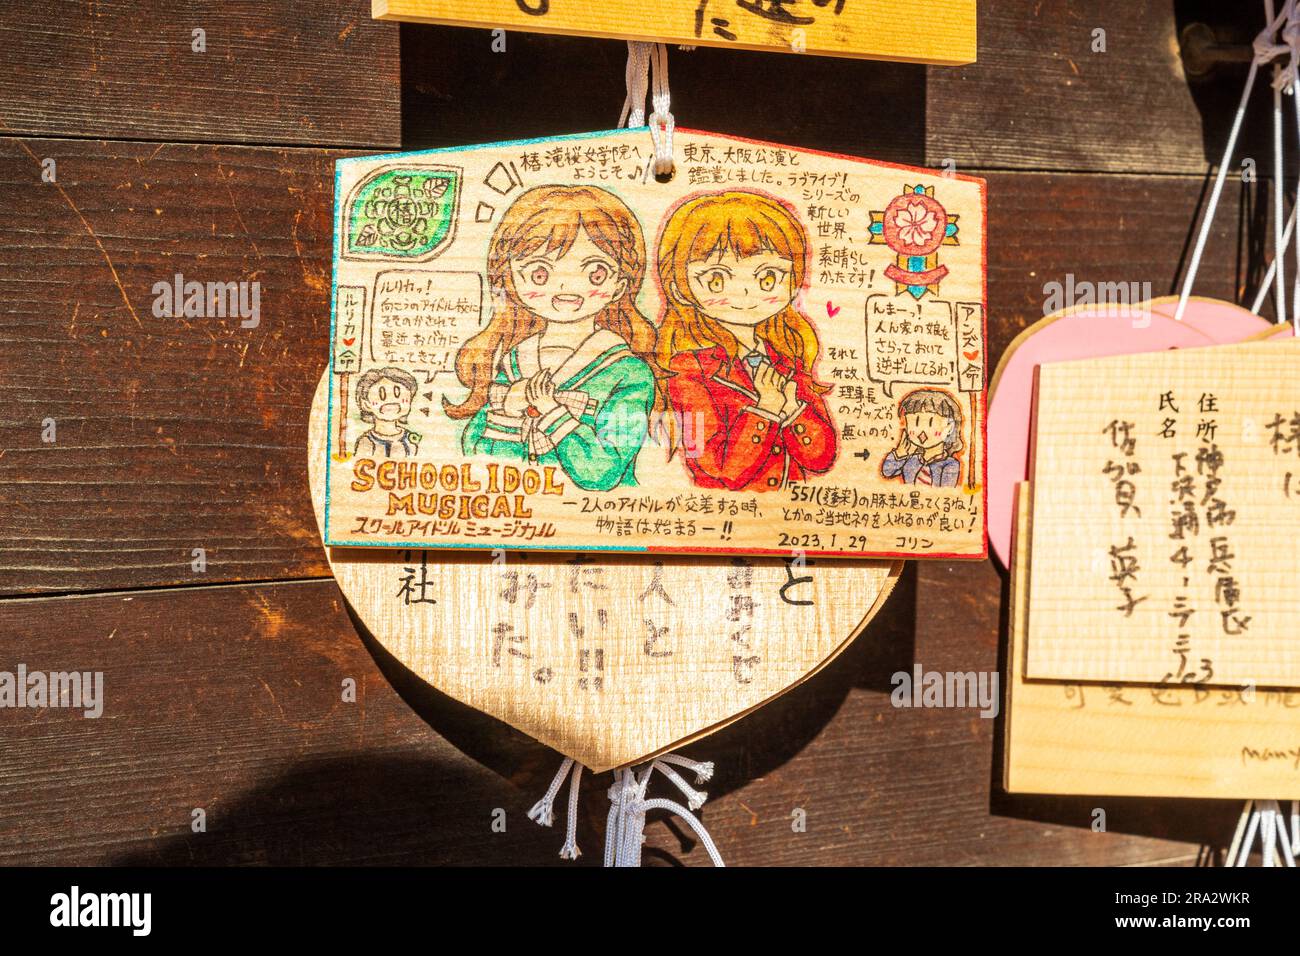 Japanese Shinto ema hanging on wooden board. Ema are wishing, pray tablets. One features two anime schoolgirls with inscription. Ikuta shrine, Kobe. Stock Photo